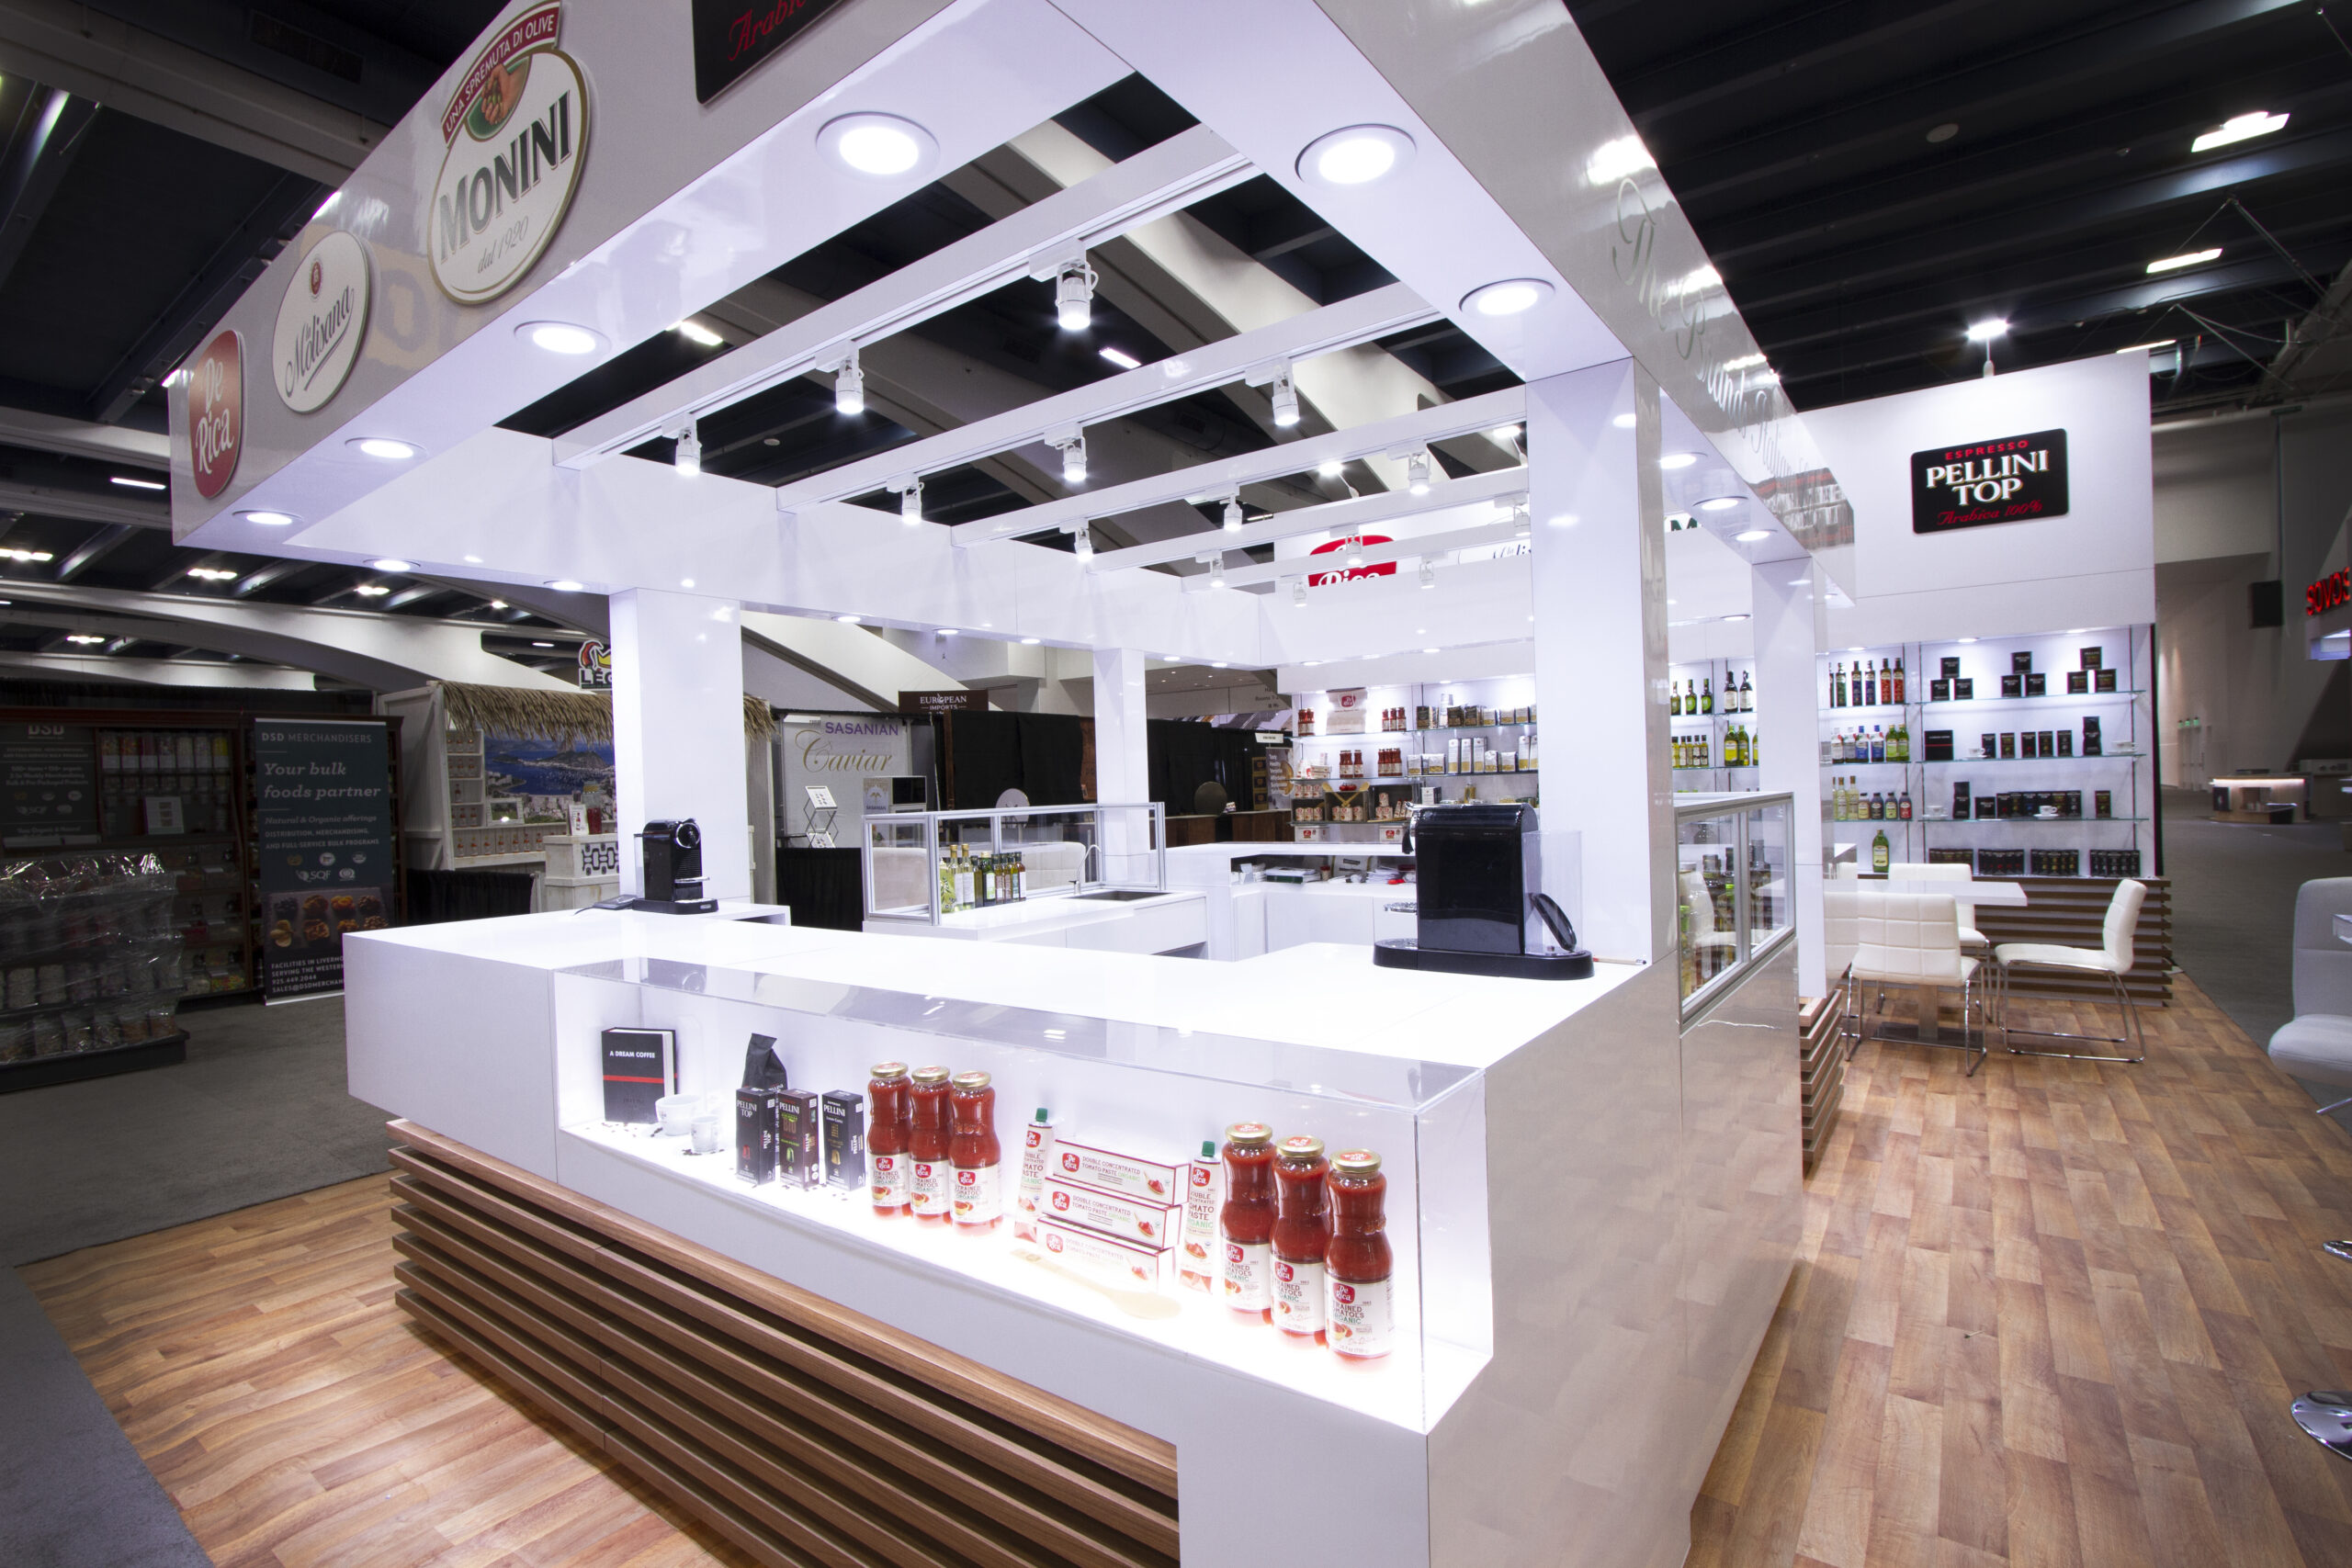 Right Front View of a Custom Exhibit for Monini at the Fancy Food Shows